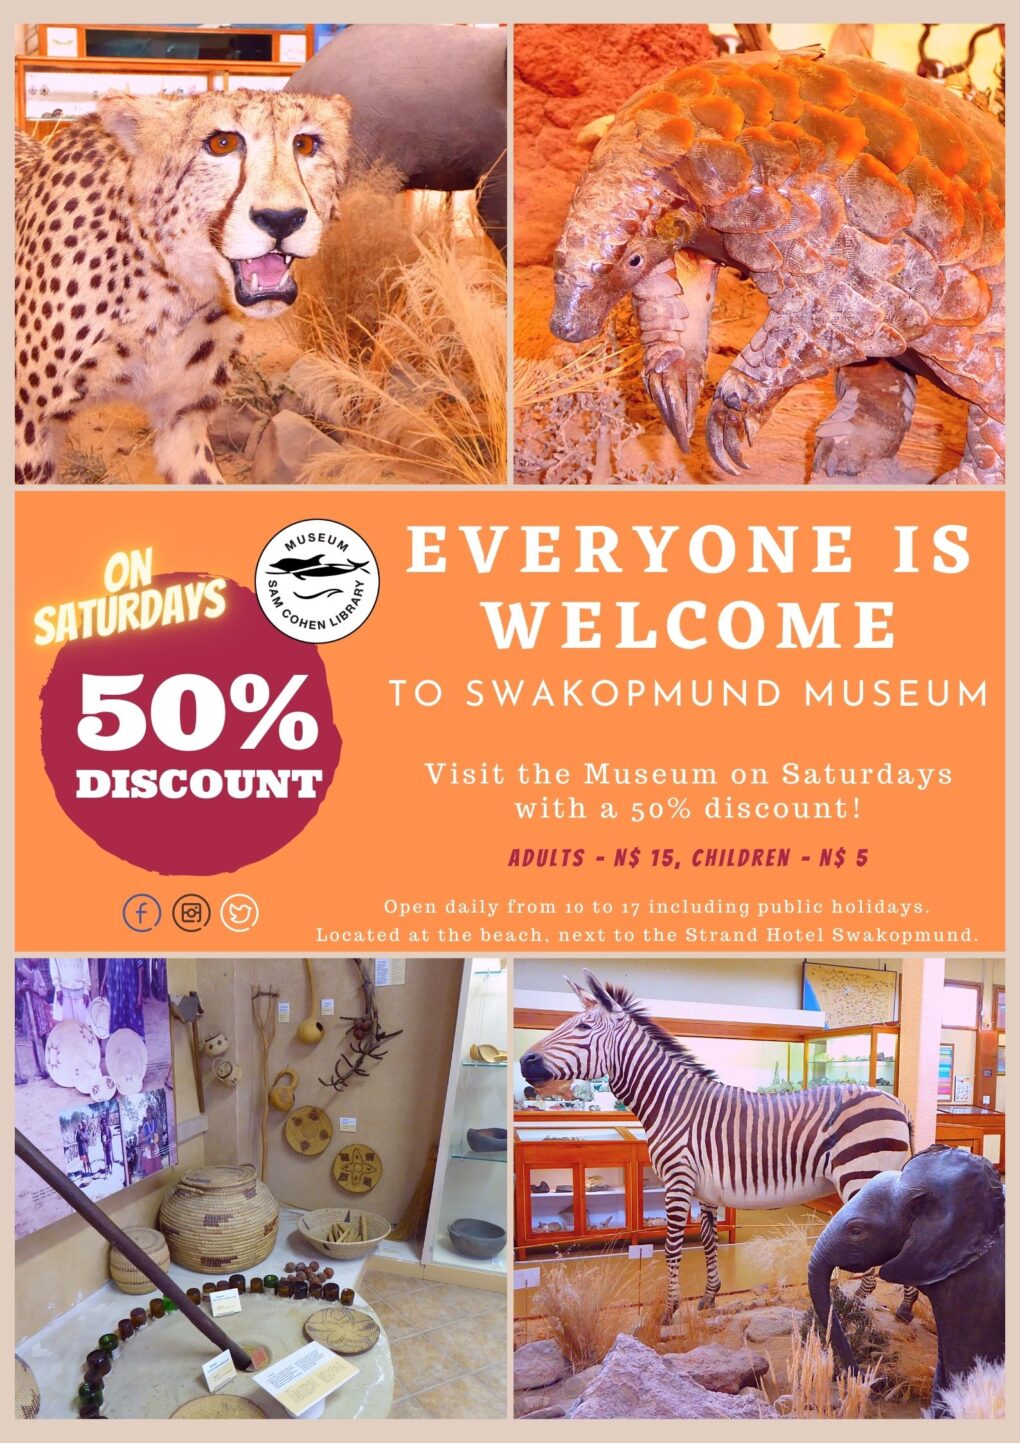 The Swakopmund Museum has a 50% discount on Saturdays!
 Adults pay N$ 15 and children N$ 5. 